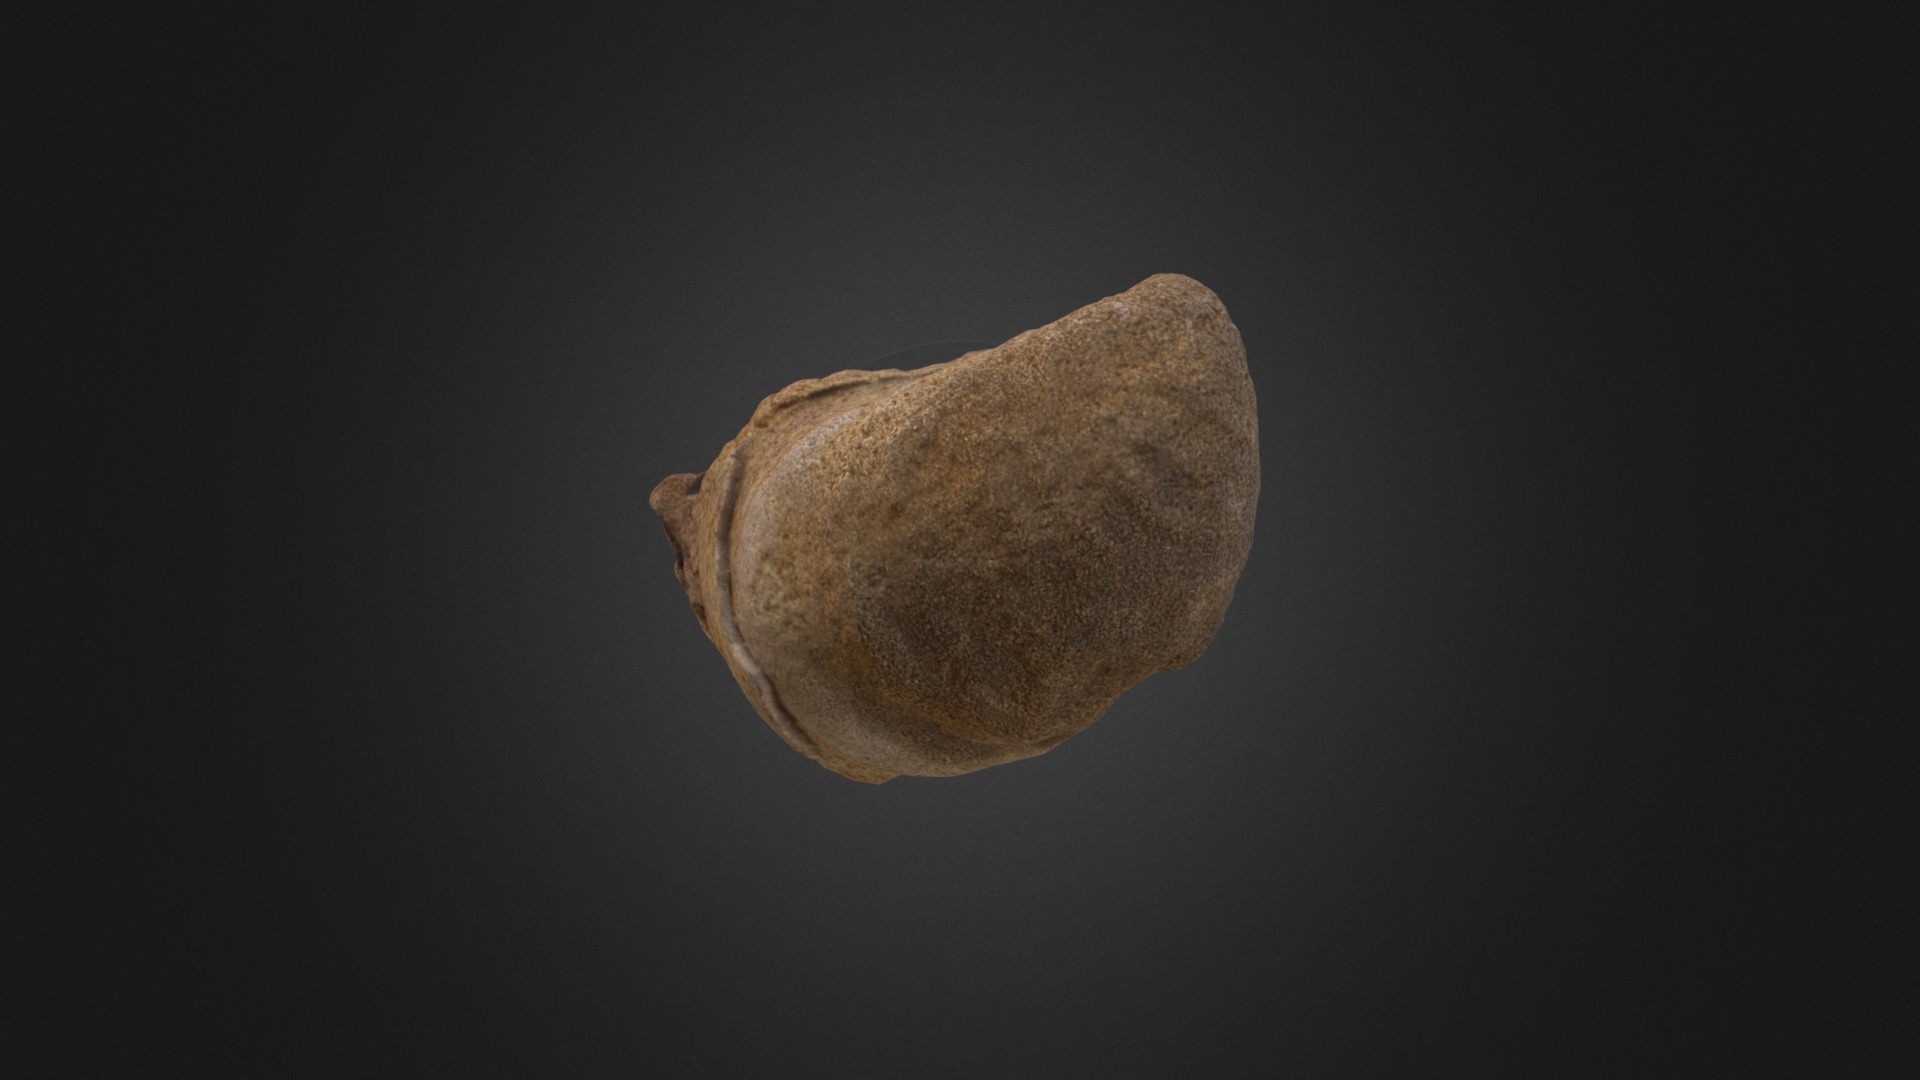 3D model Inoceramus erectus D8426 - This is a 3D model of the Inoceramus erectus D8426. The 3D model is about a stone with a dark background.